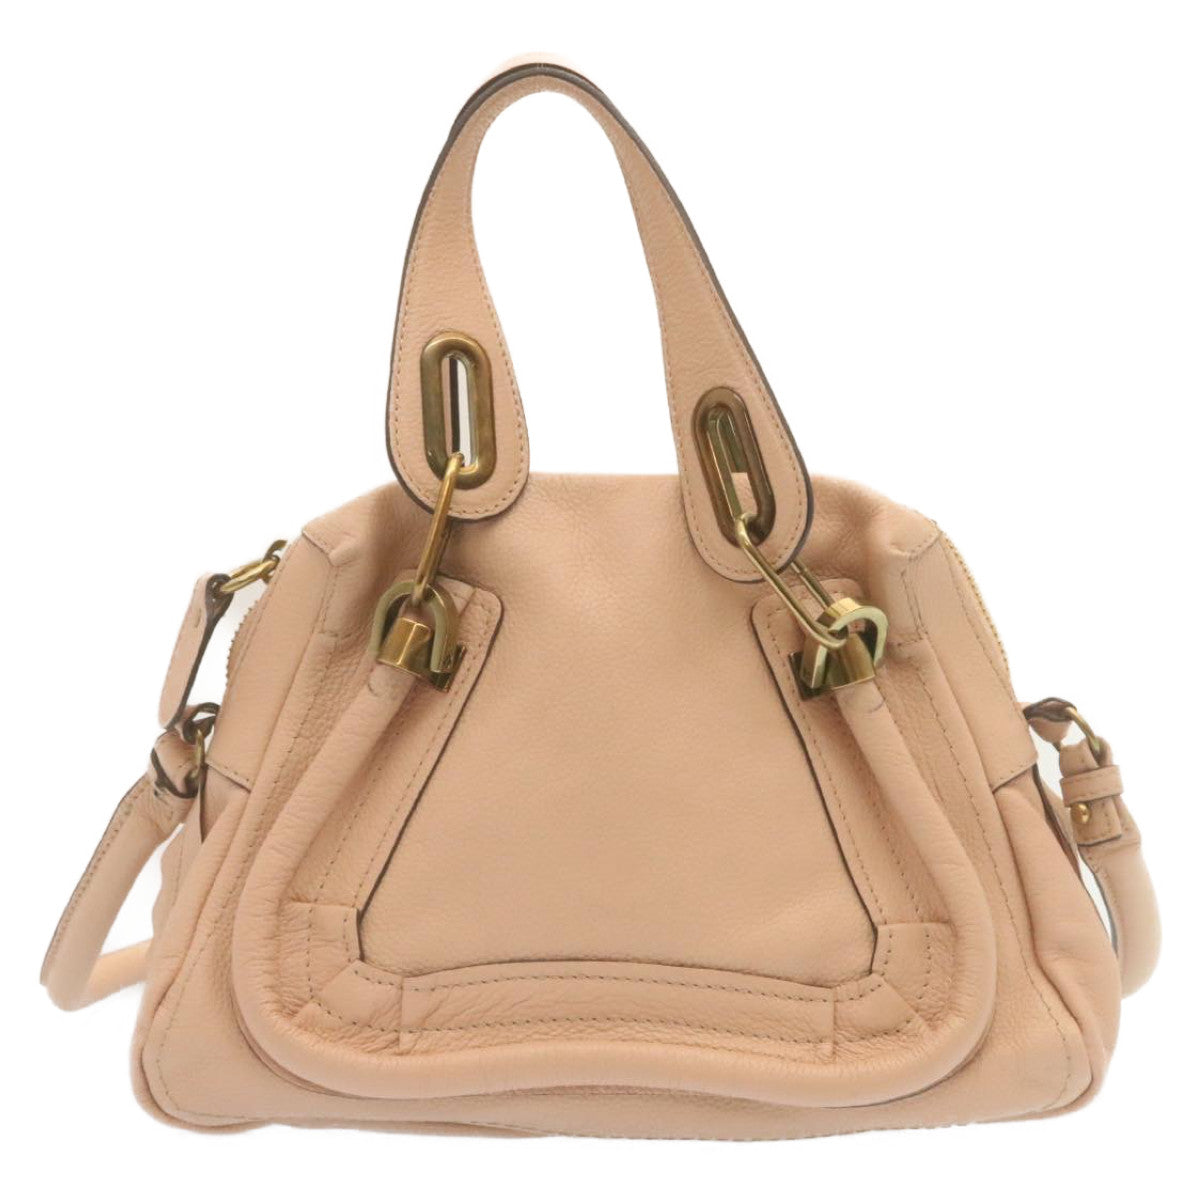 Chloe Hand Bag Leather 2way Pink Auth am2241g